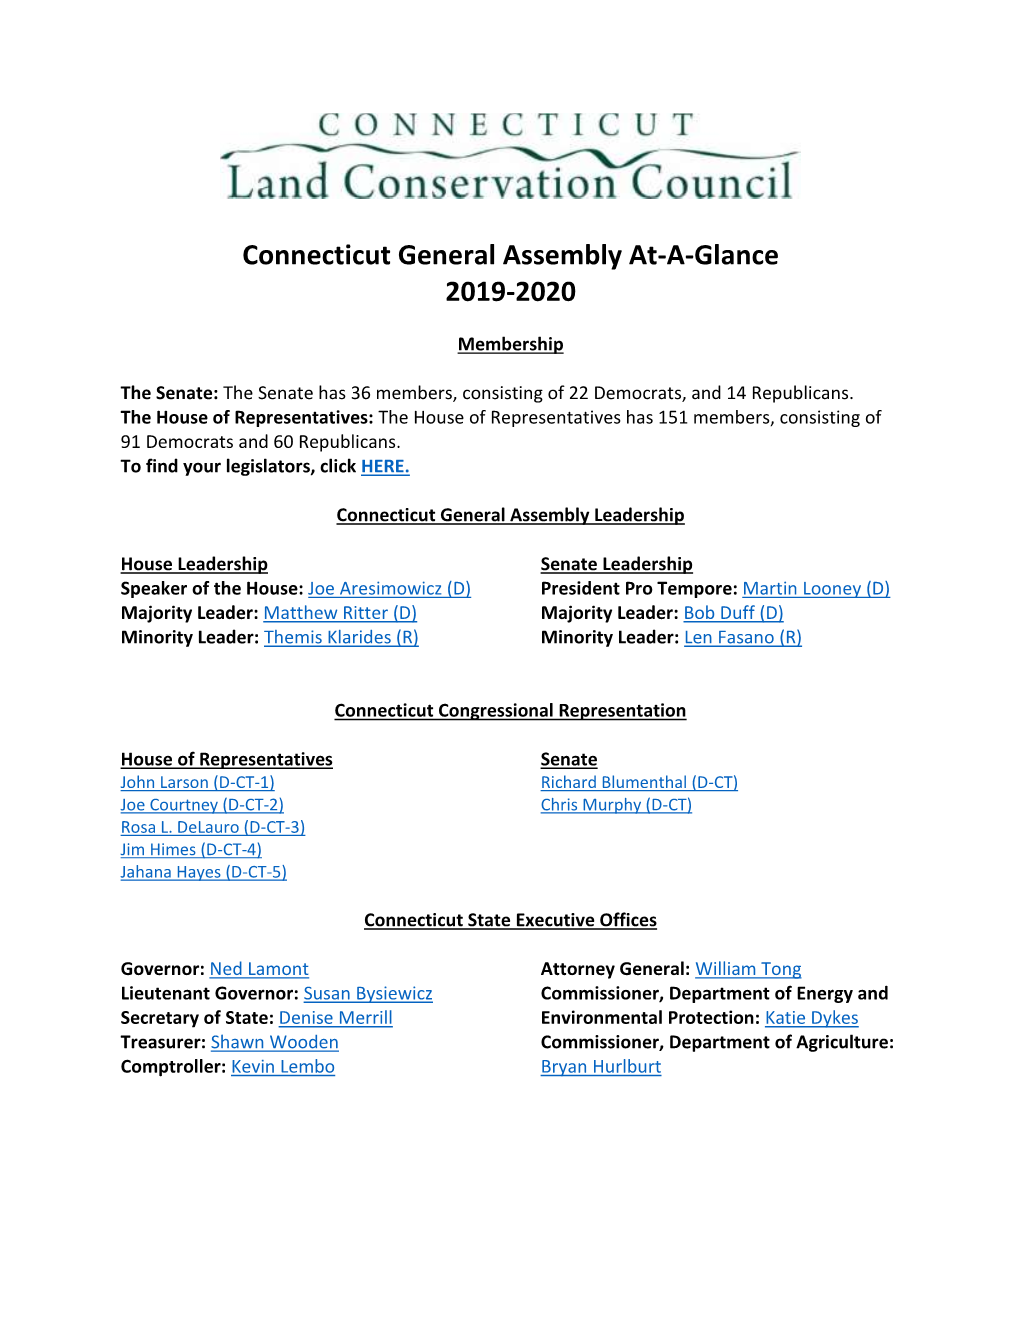 Connecticut General Assembly At-A-Glance 2019-2020